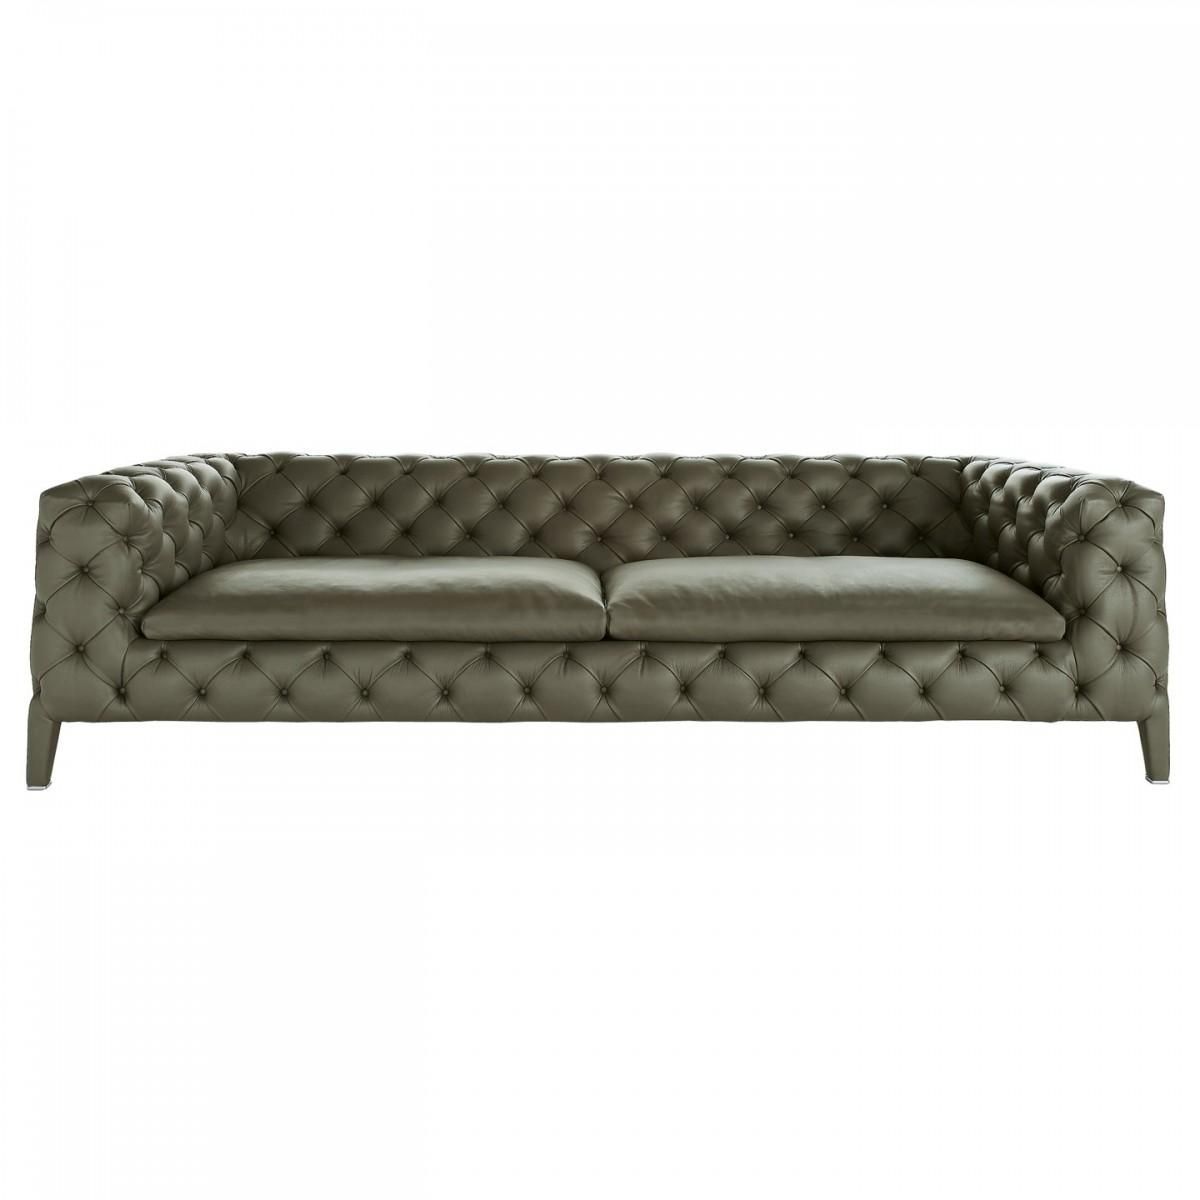 Windsor Sofa 246Cm Throughout Windsor Sofas (View 1 of 20)